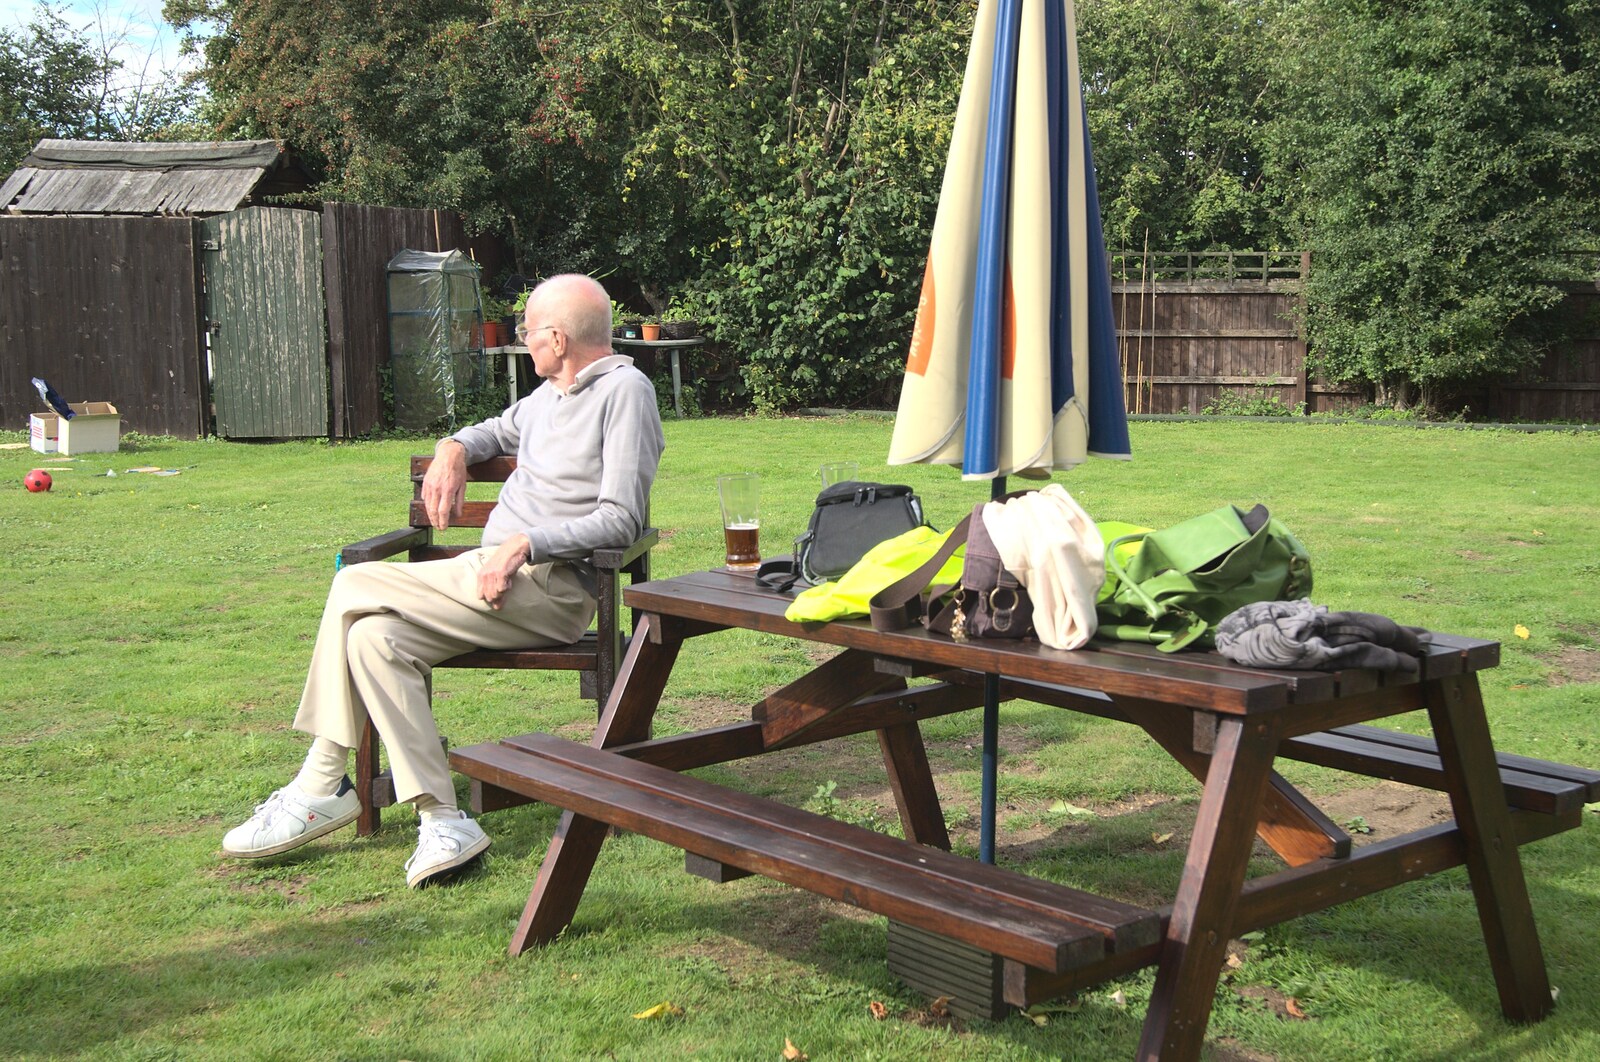 The Old Man sits and watches from Barbeque at the Swan Inn, Brome, Suffolk - 5th August 2011